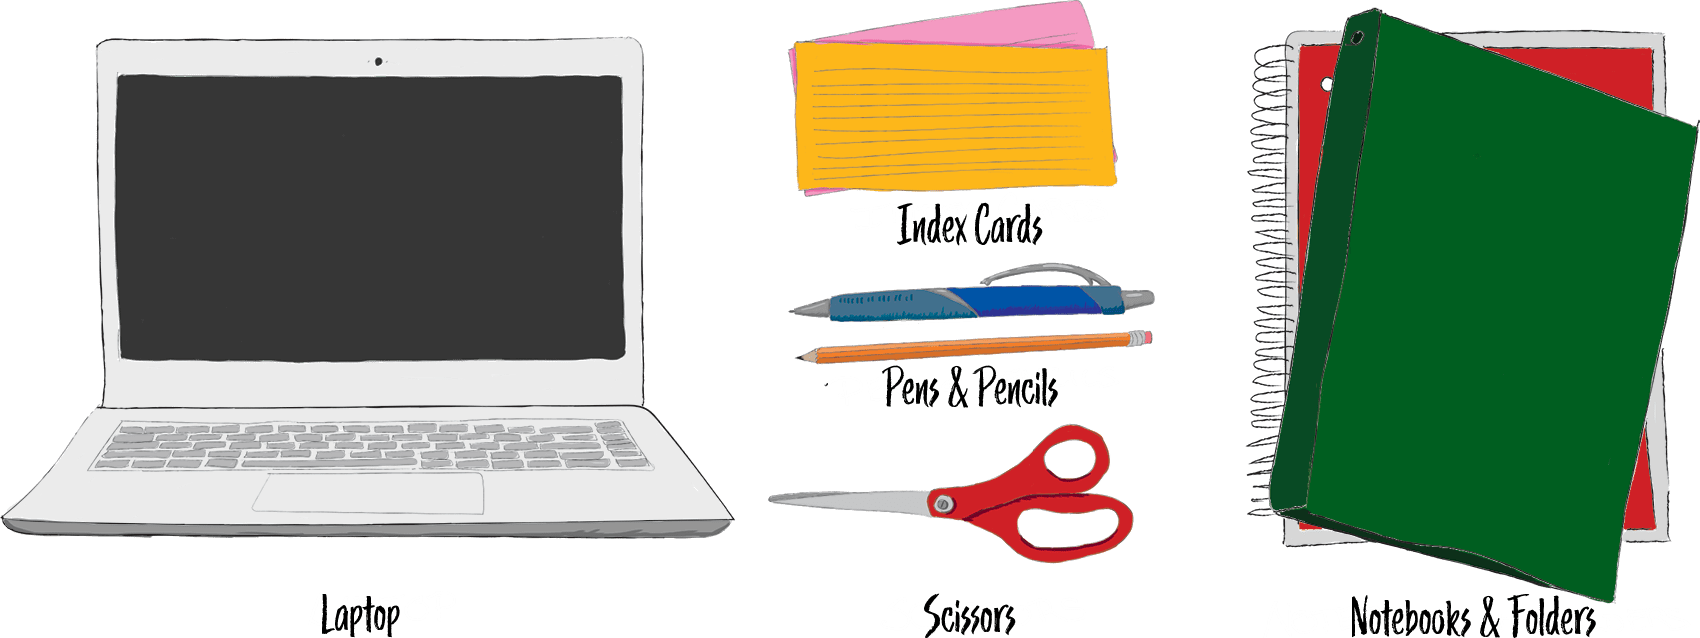 Bring: Laptop computer (recommended but not required) - A few notebooks and folders - Planner - Index cards - Pens/pencils - Scissors 